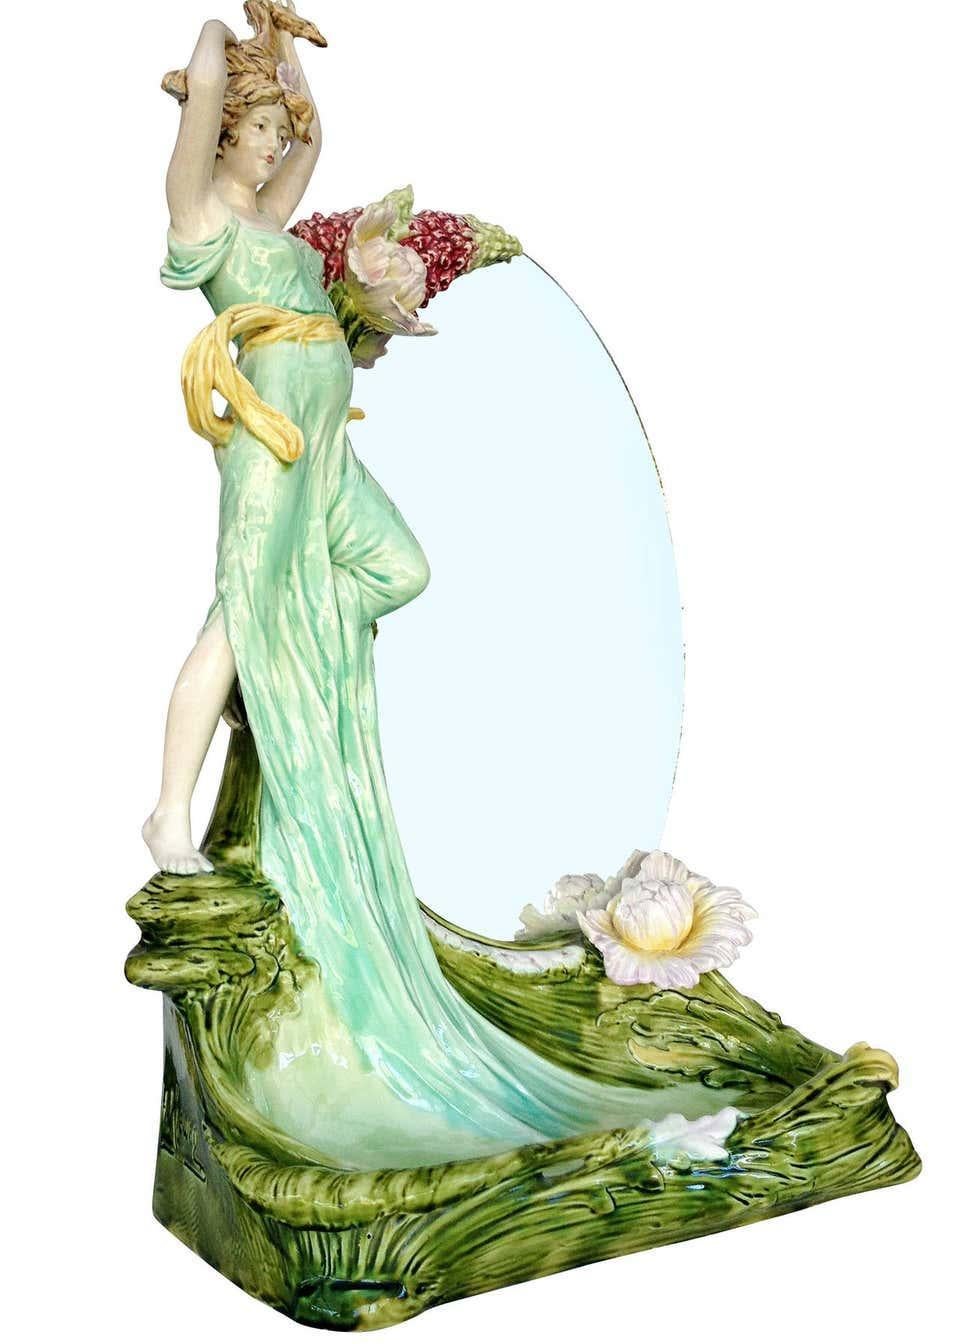 This oval vanity mirror is decorated with a large 23-inch ceramic female figure statue with Art Nouveau floral patterns. A large tray in front of the mirror is decorated with an organic leaf pattern. The tray can hold jewelry or small hand towels.